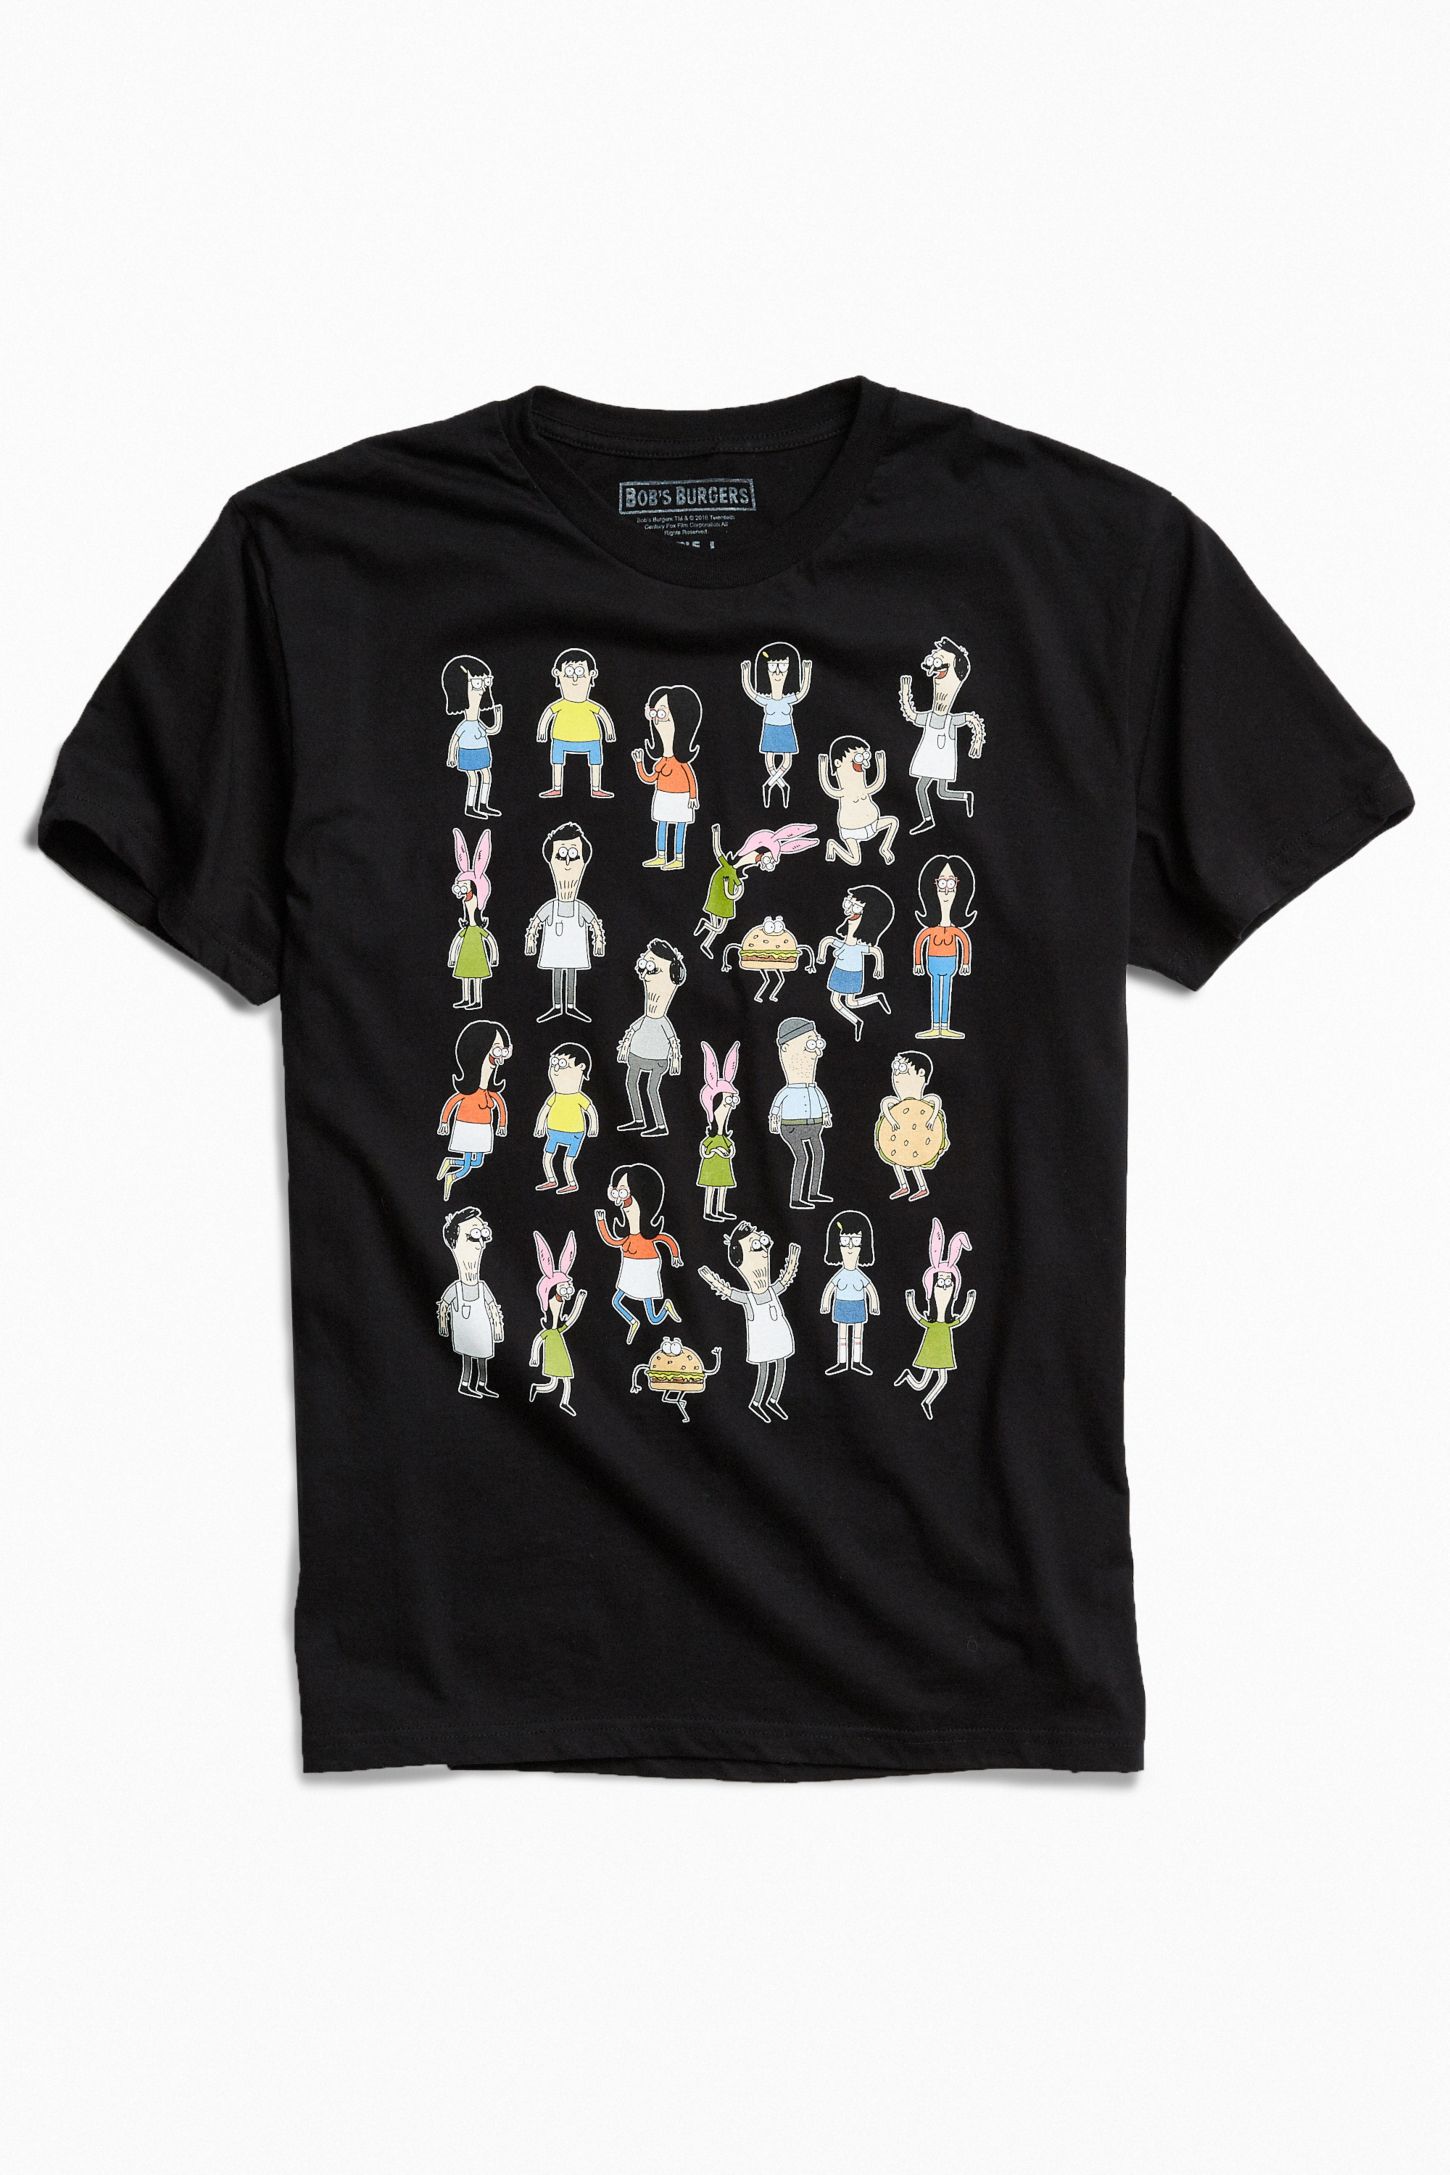 Bob's Burgers Jay Howell Tee | Urban Outfitters